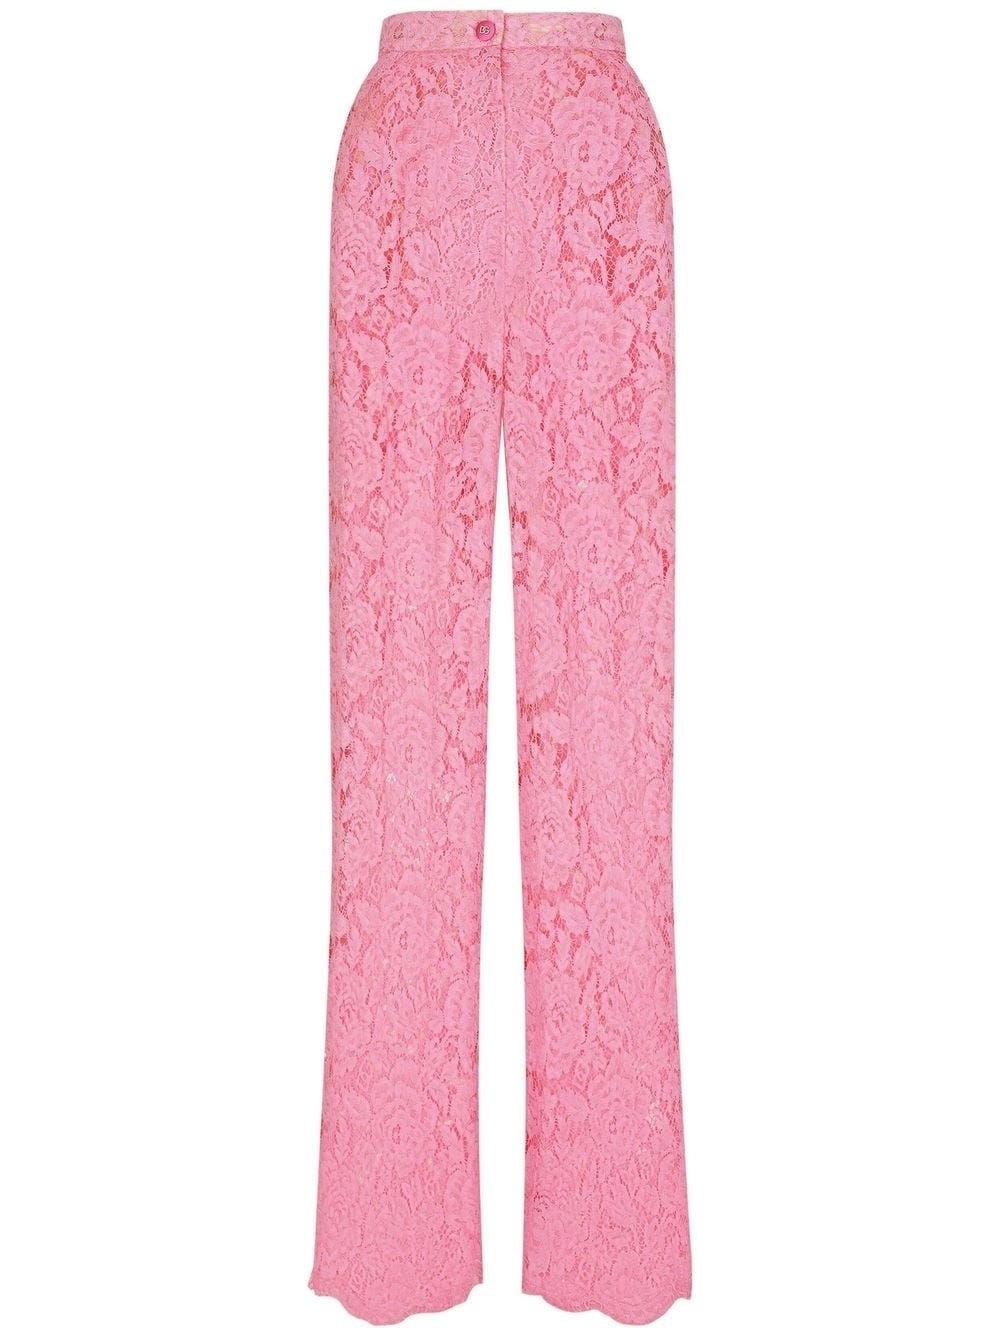 DOLCE & GABBANA PINK TAILORED PANTS IN FLORAL LACE